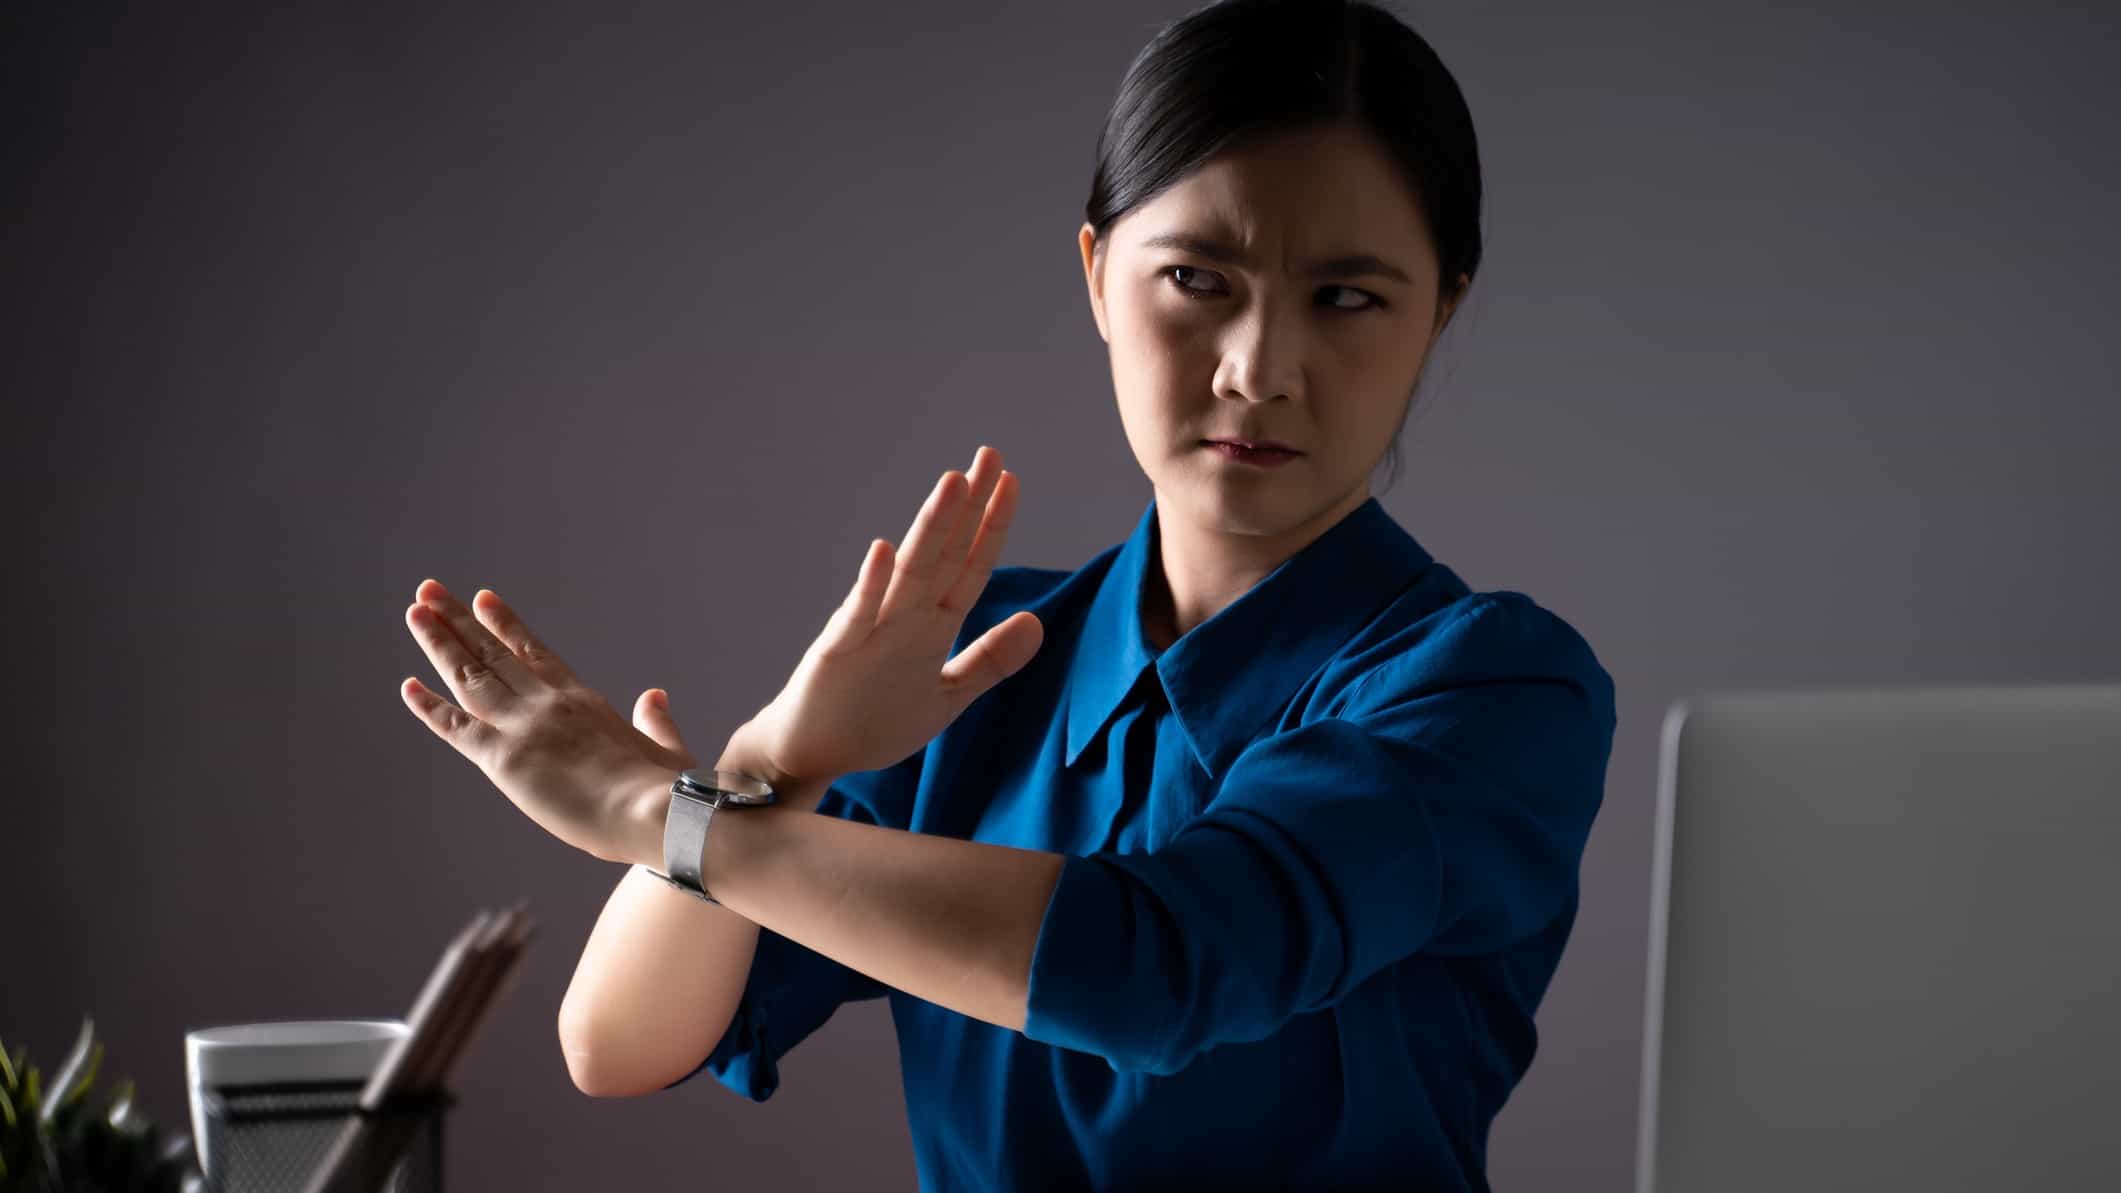 Woman in an office crosses her arms in front of her in a stop gesture.